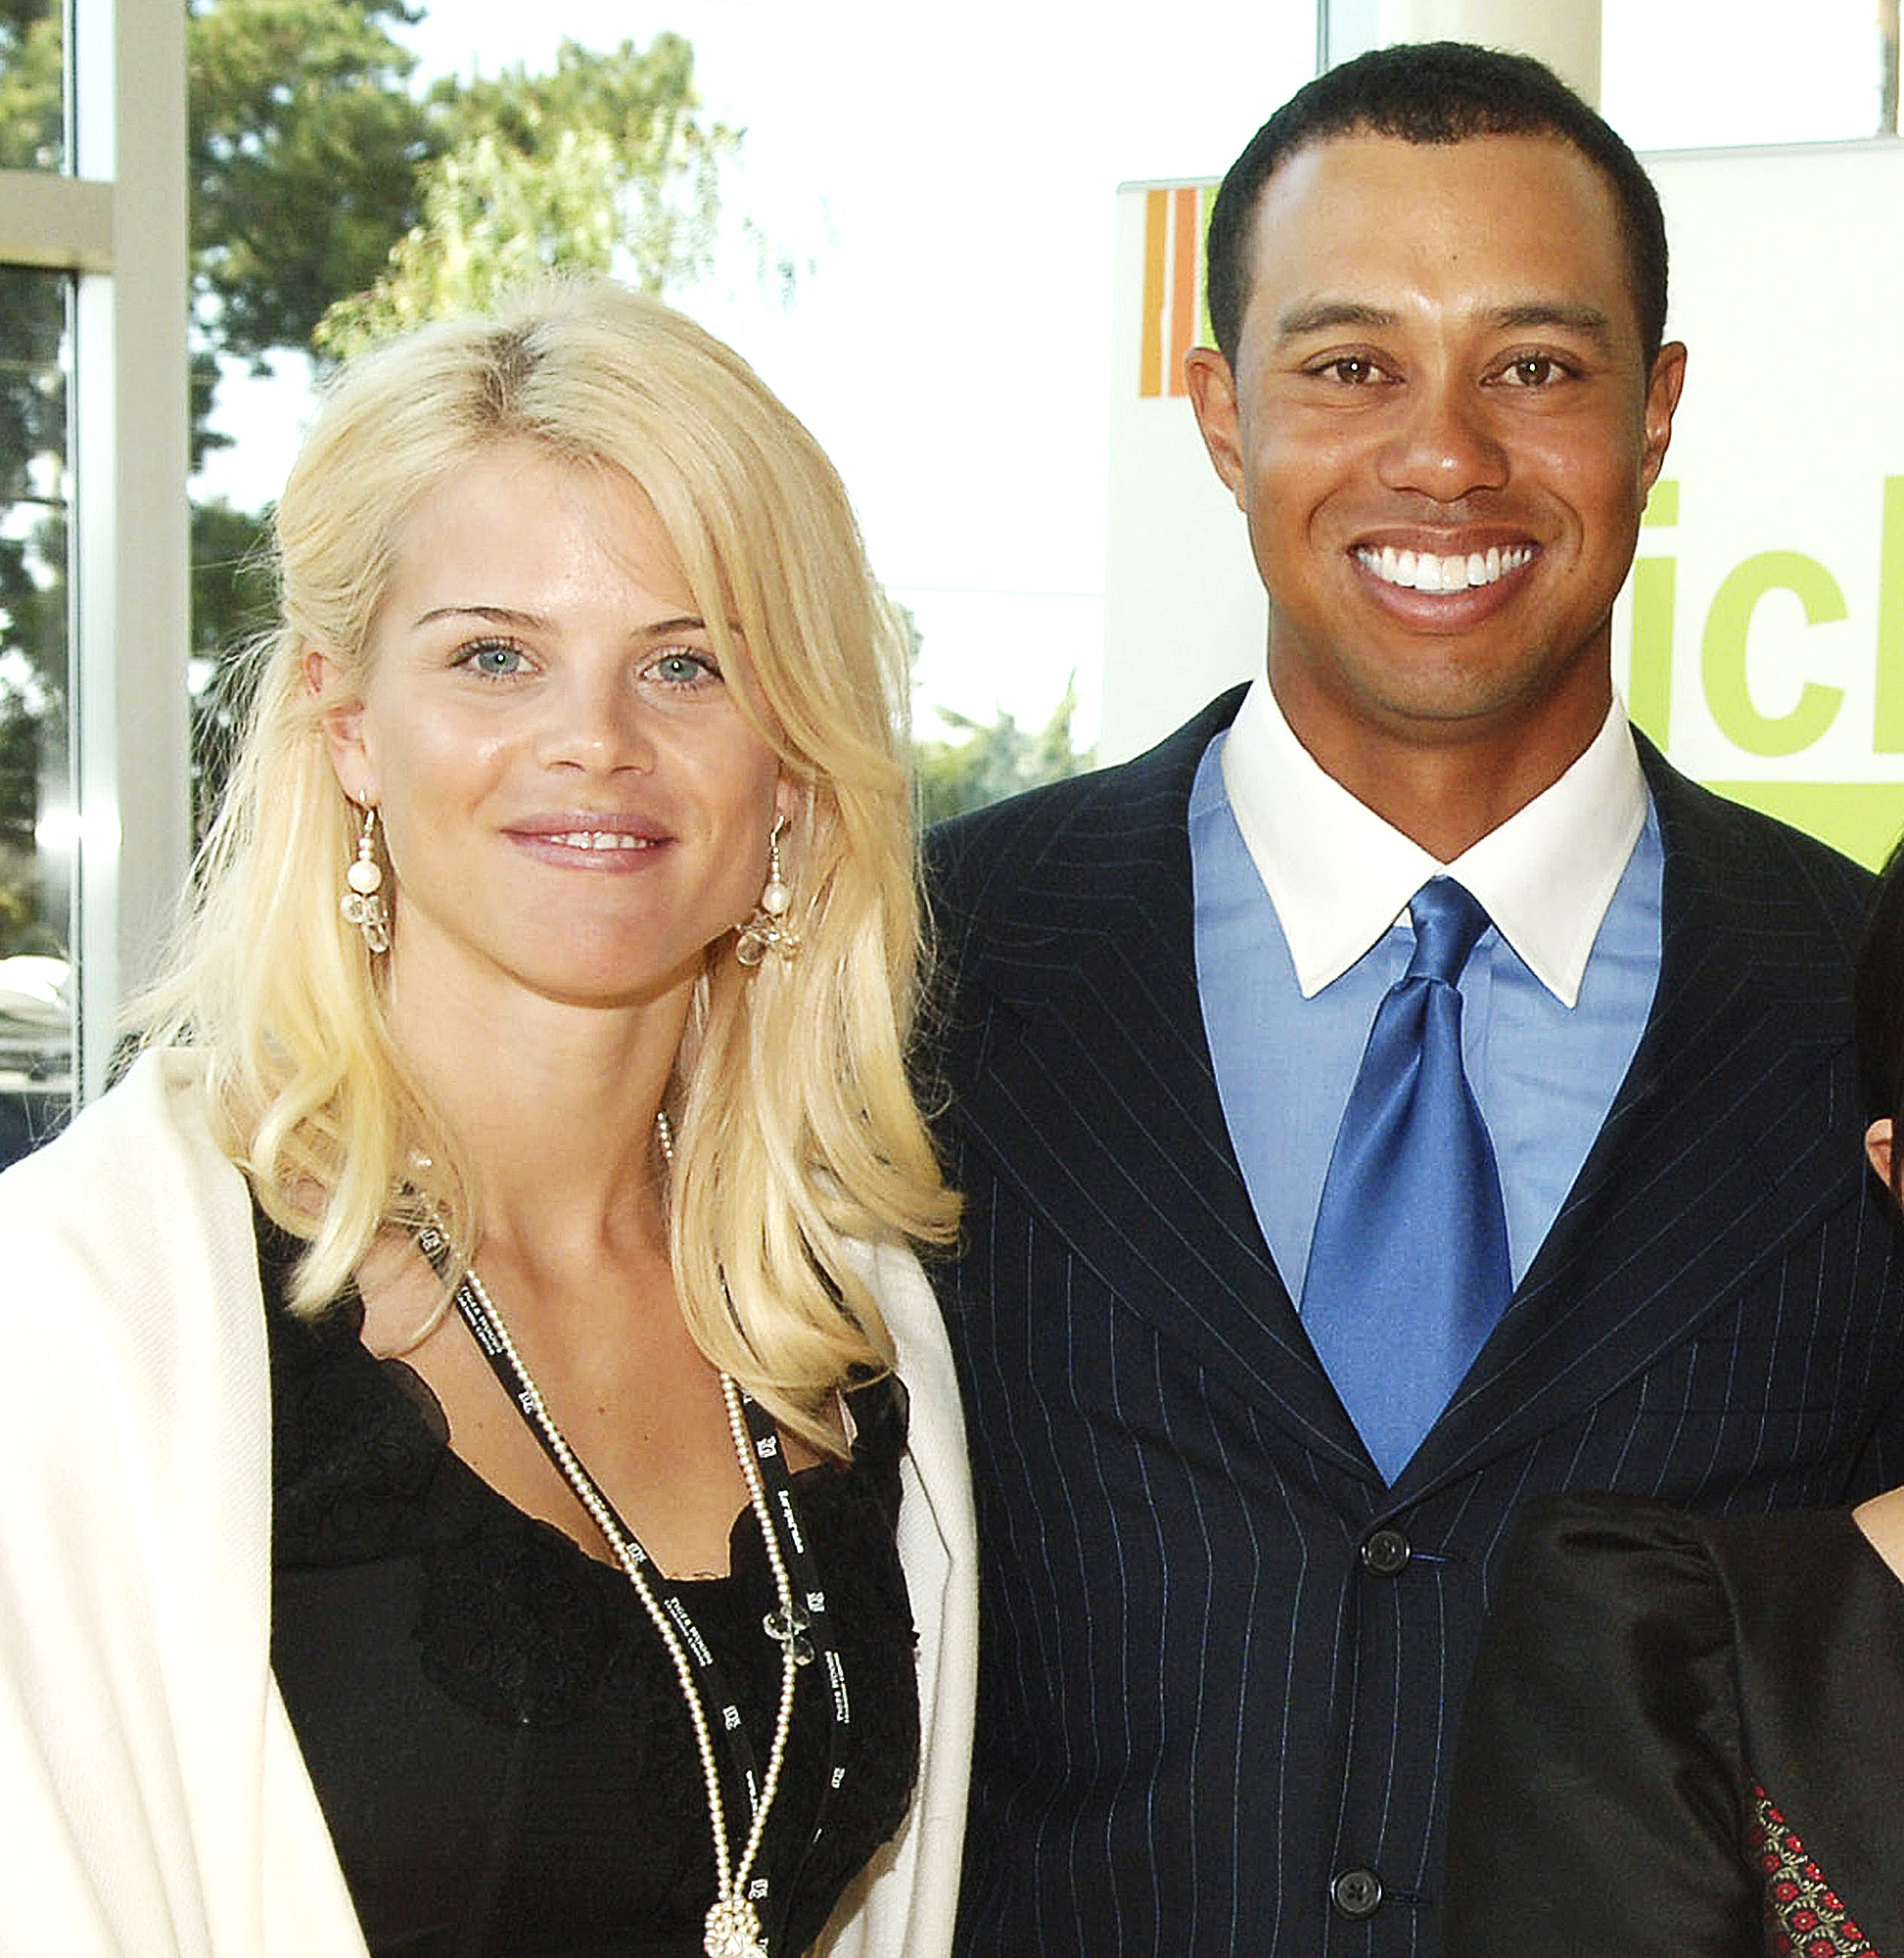 Tiger Woods, Elin Nordegrens Quotes About Their Relationship